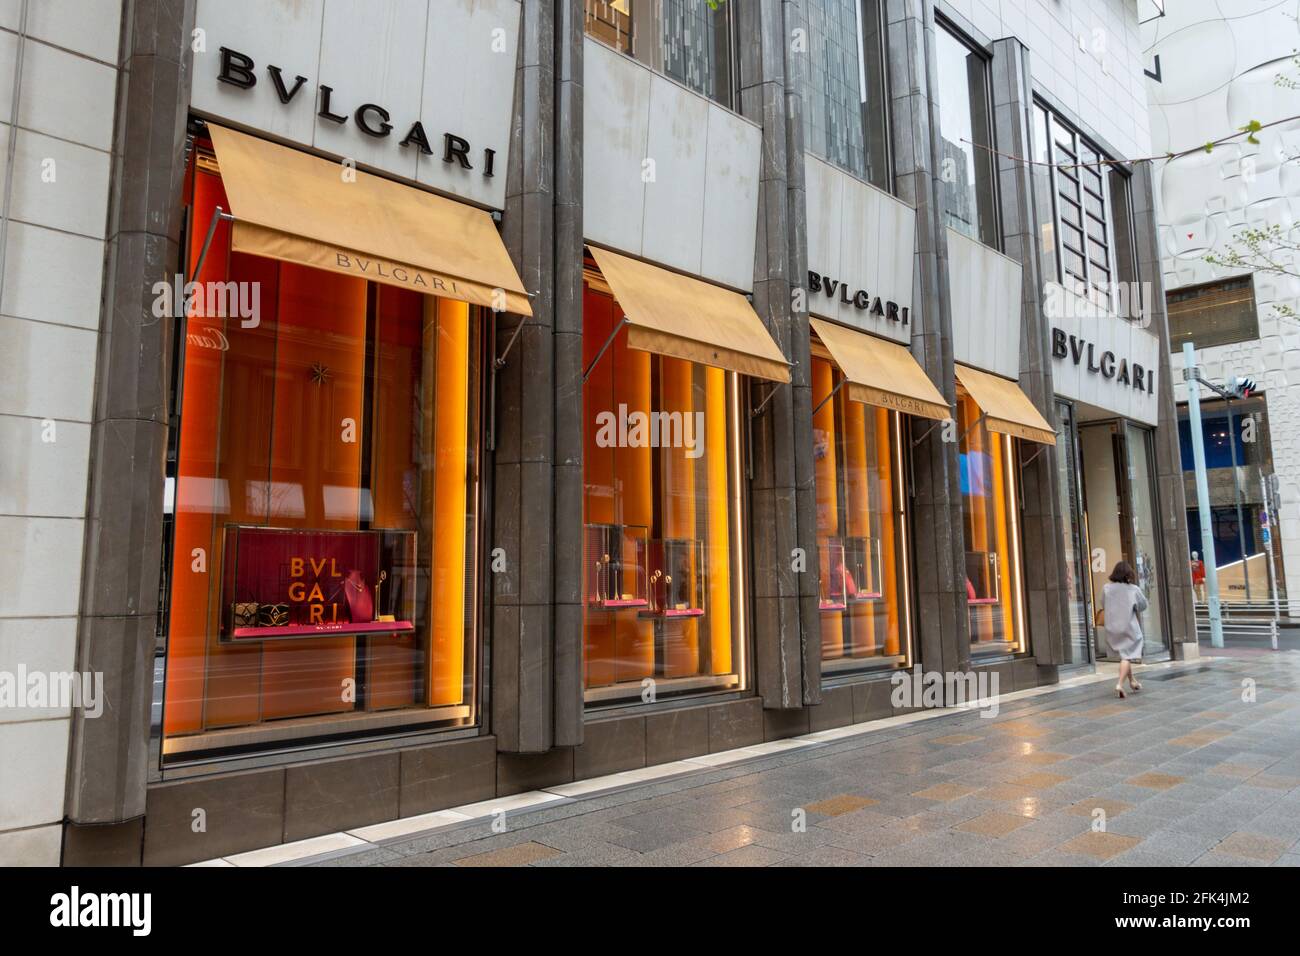 Tokyo, Japan, March 29, 2020: Facade of Bvlgari store closed during COVID-19 pandemic. Italian luxury brand known for its jewellery, watches, fragranc Stock Photo